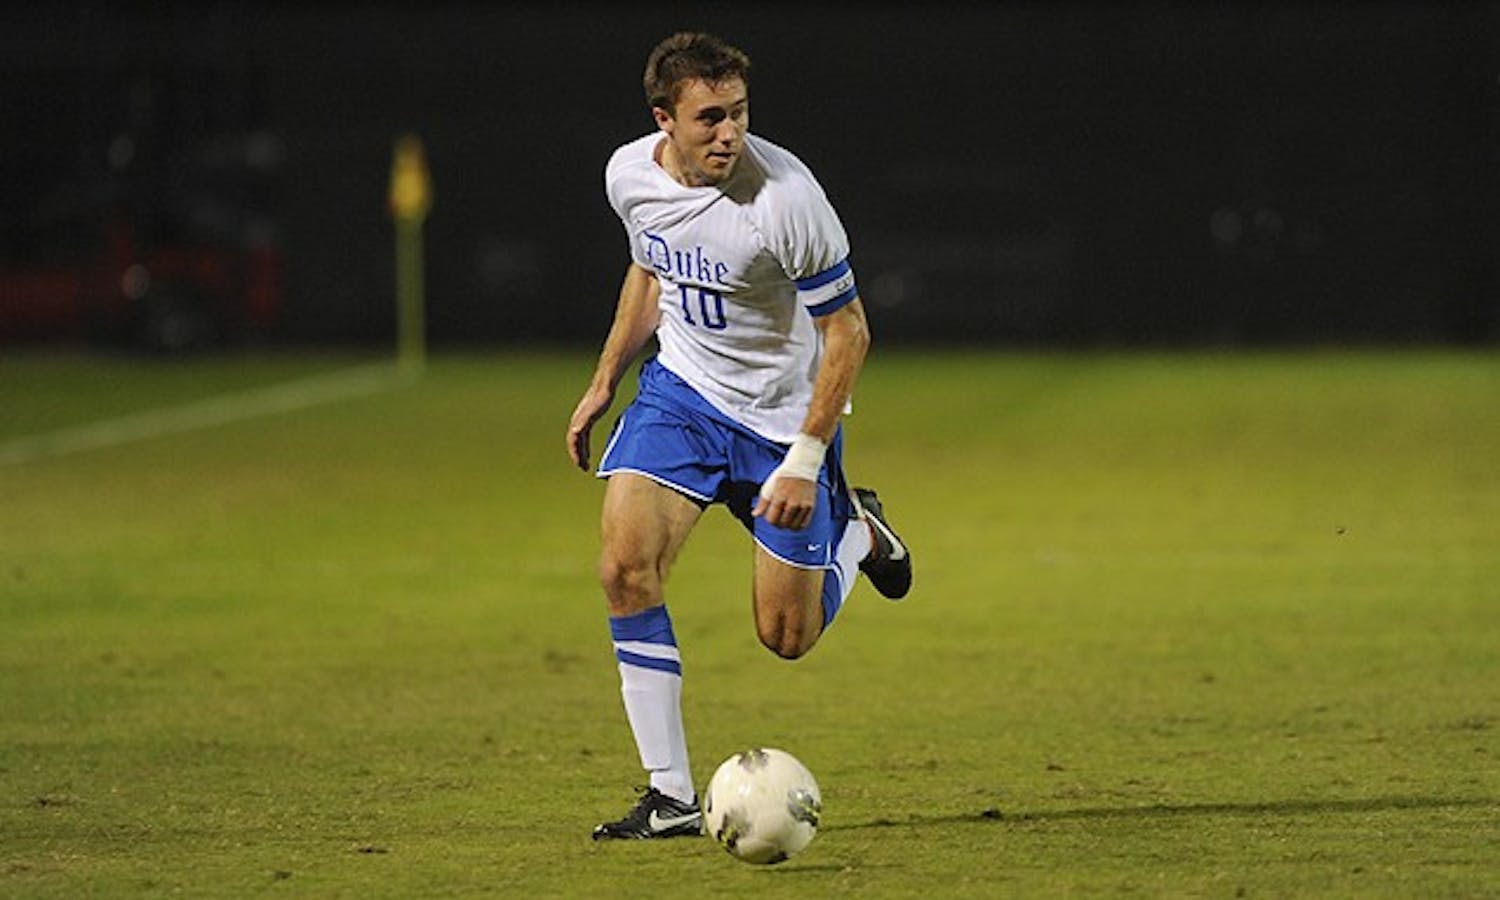 Andrew Wenger and the Duke offense face a tough matchup with Hokies’ goalkeeper Kyle Renfro.